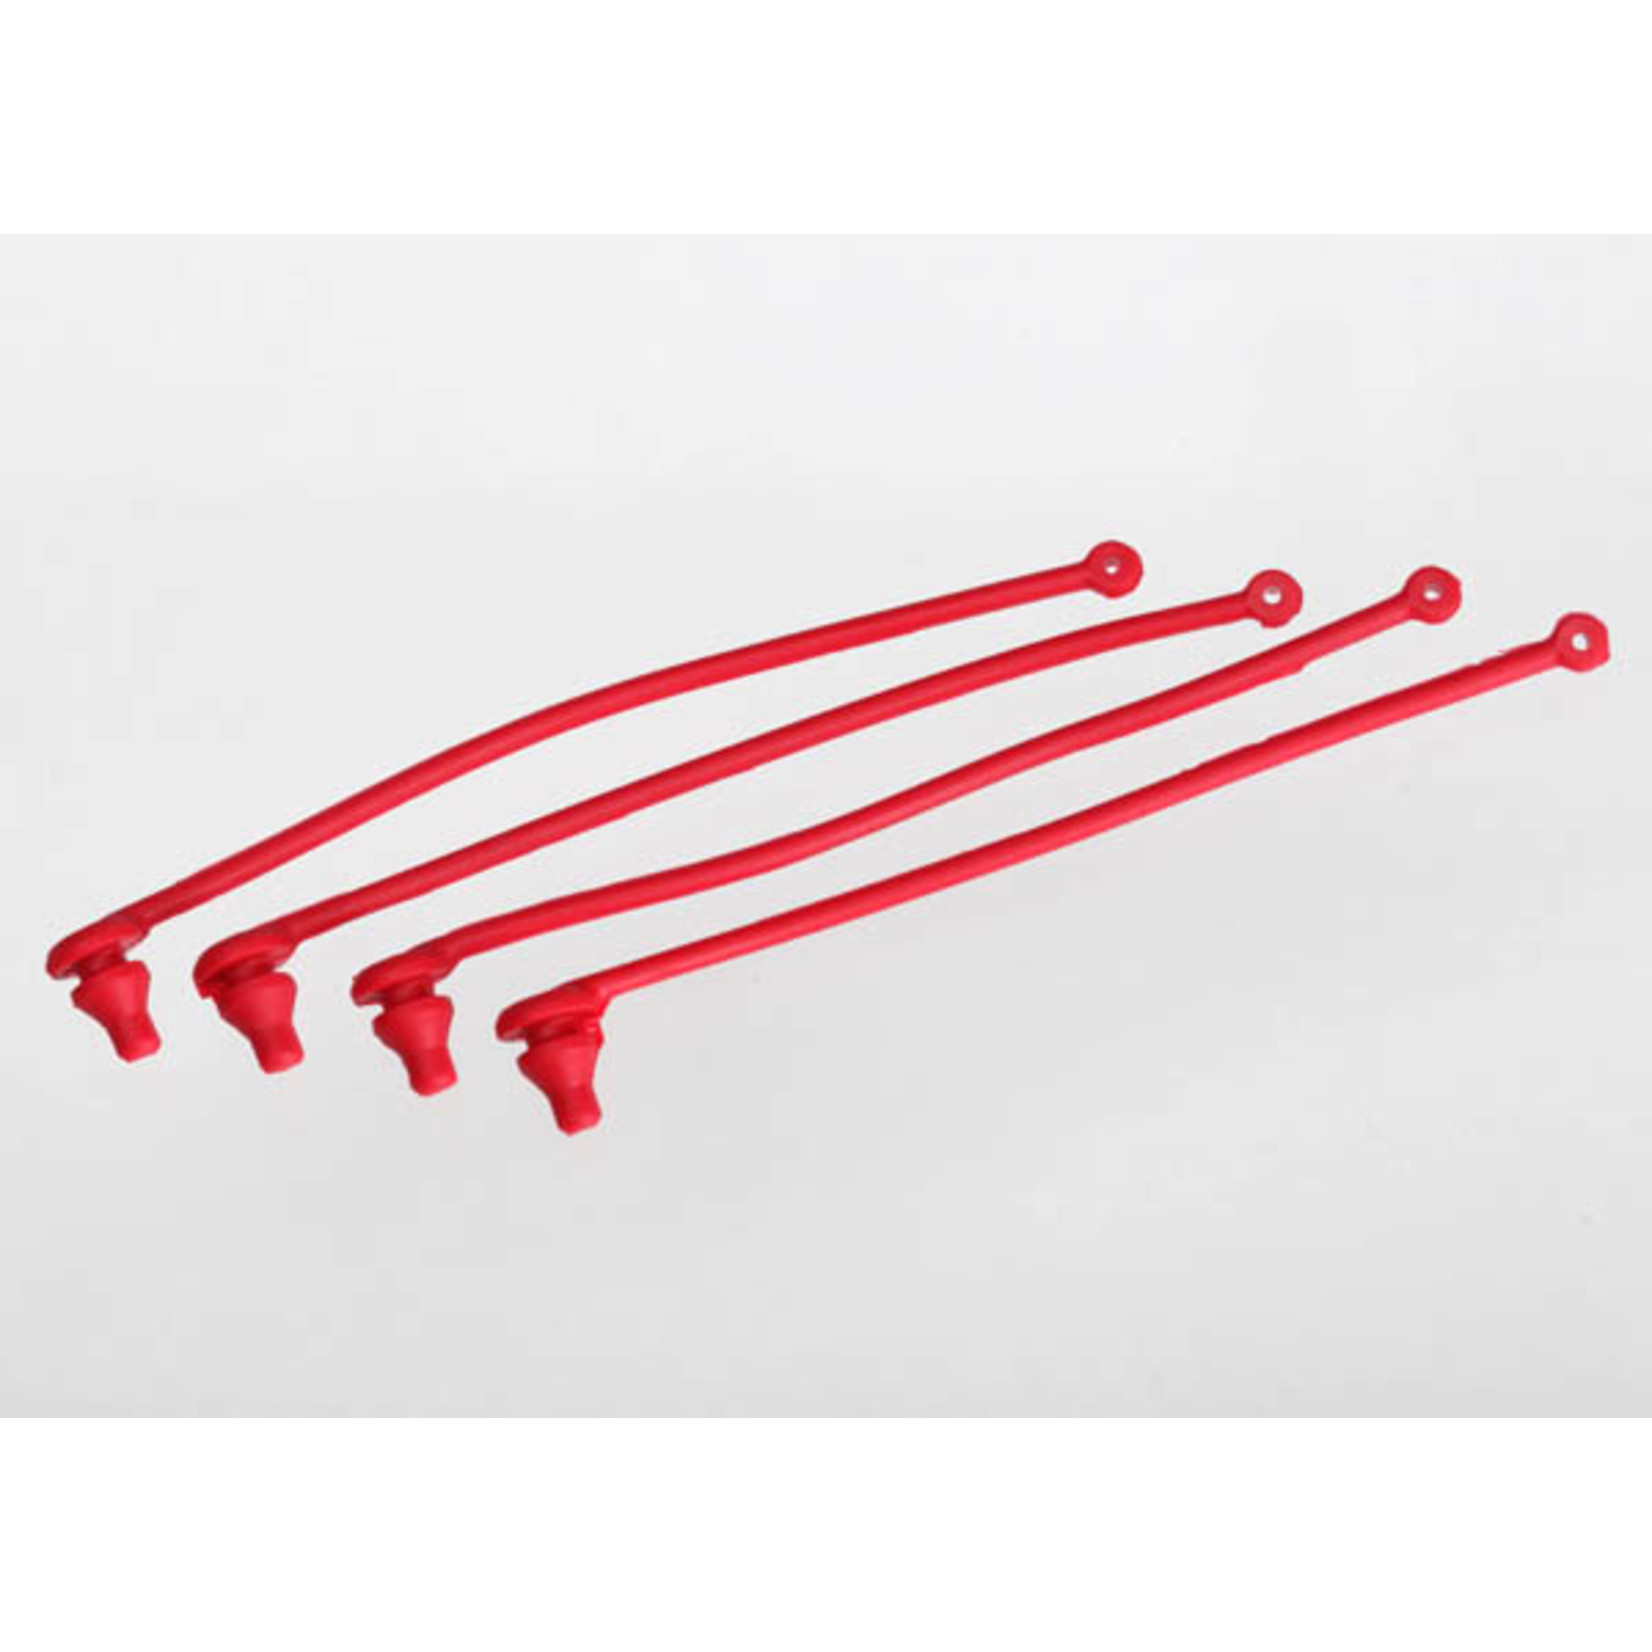 Traxxas 5752 - Body clip retainer, red (4)